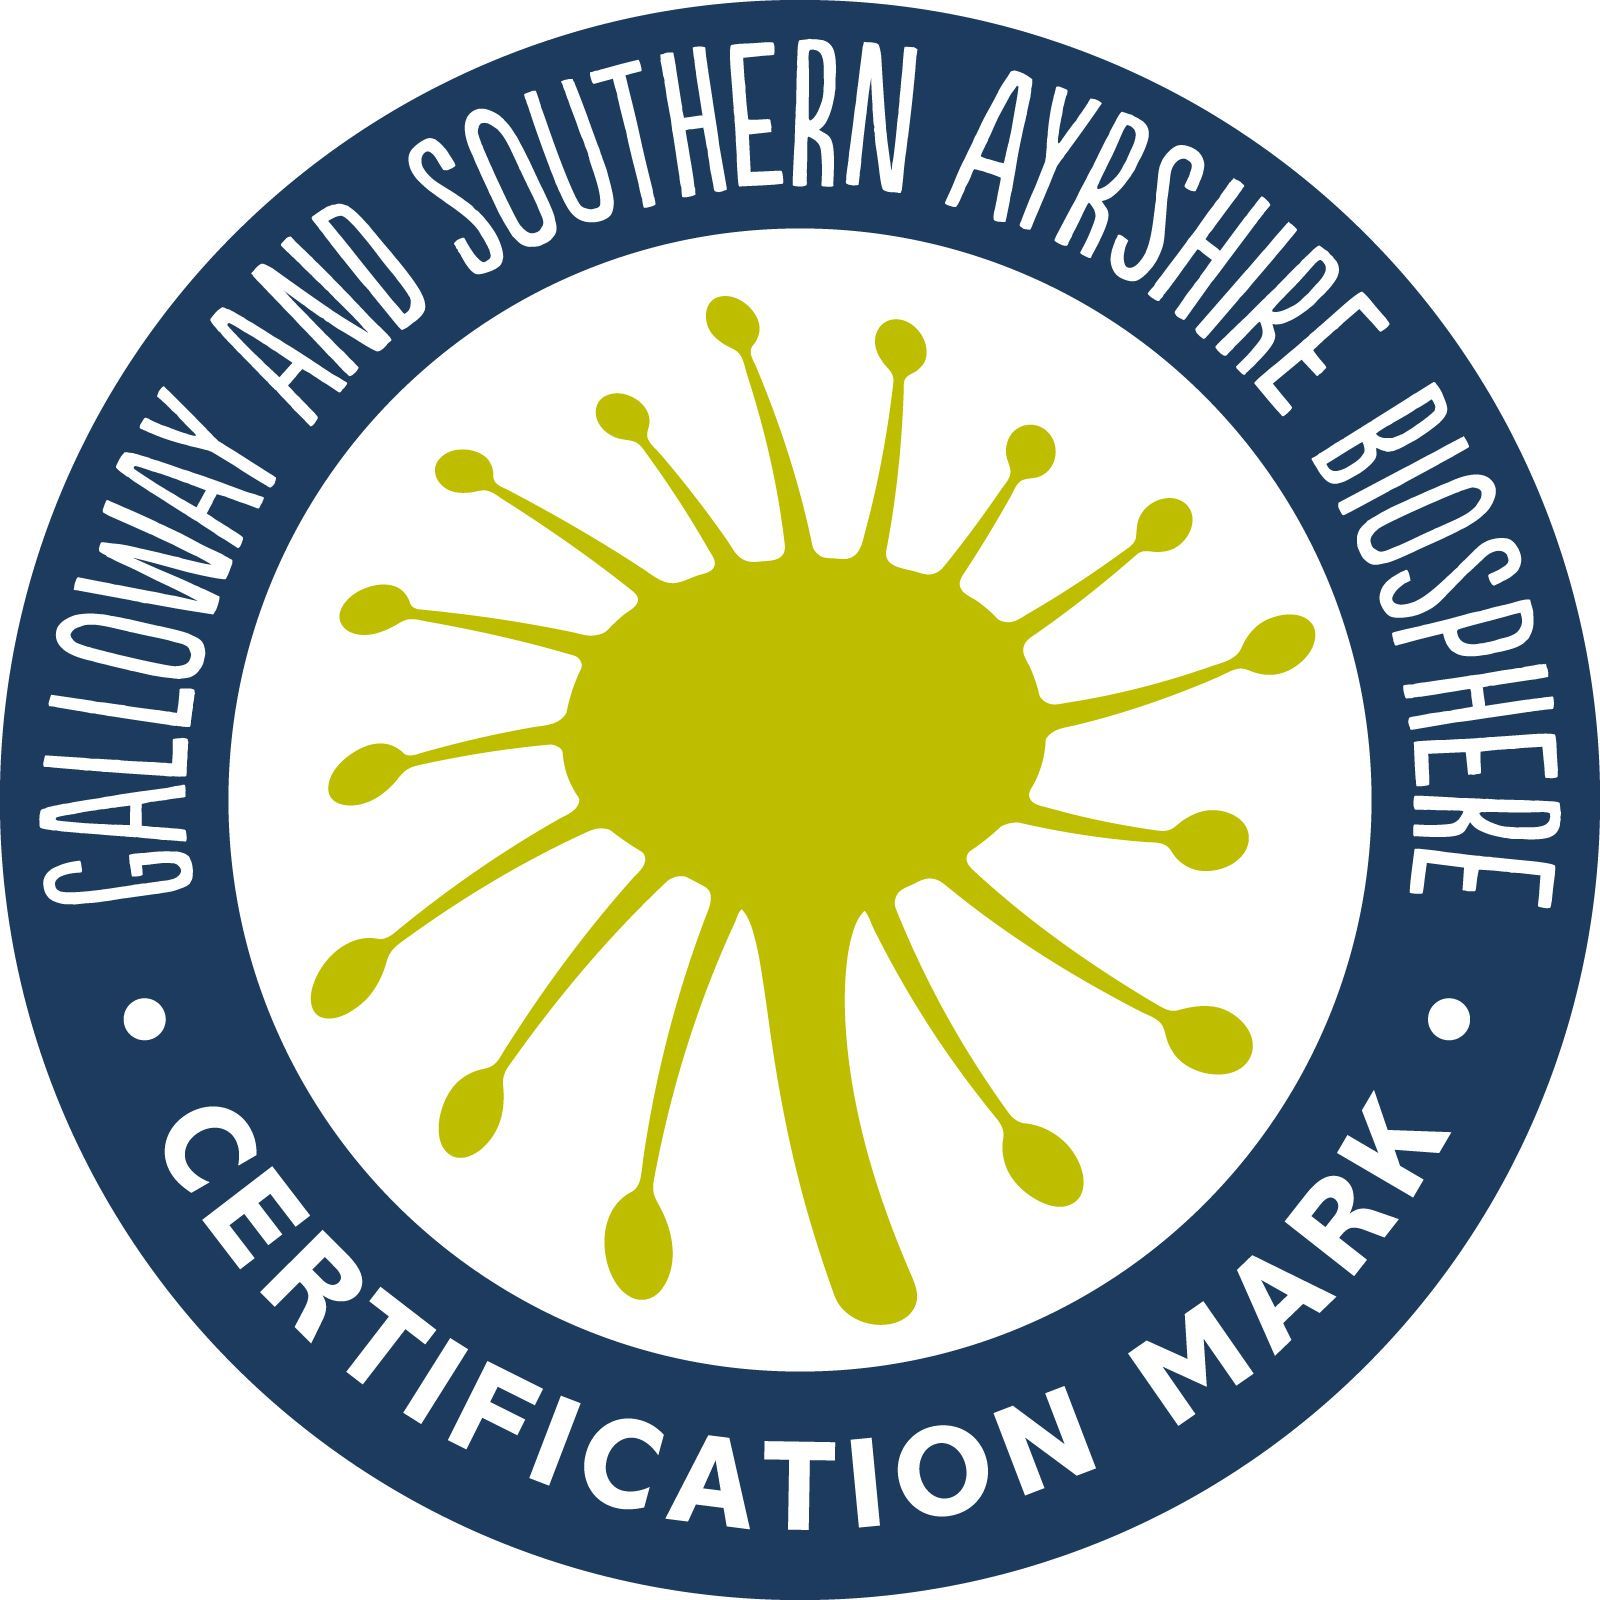 UNESCO's Galloway and South Ayrshire Biosphere logo certification mark for Ingrained Culture.